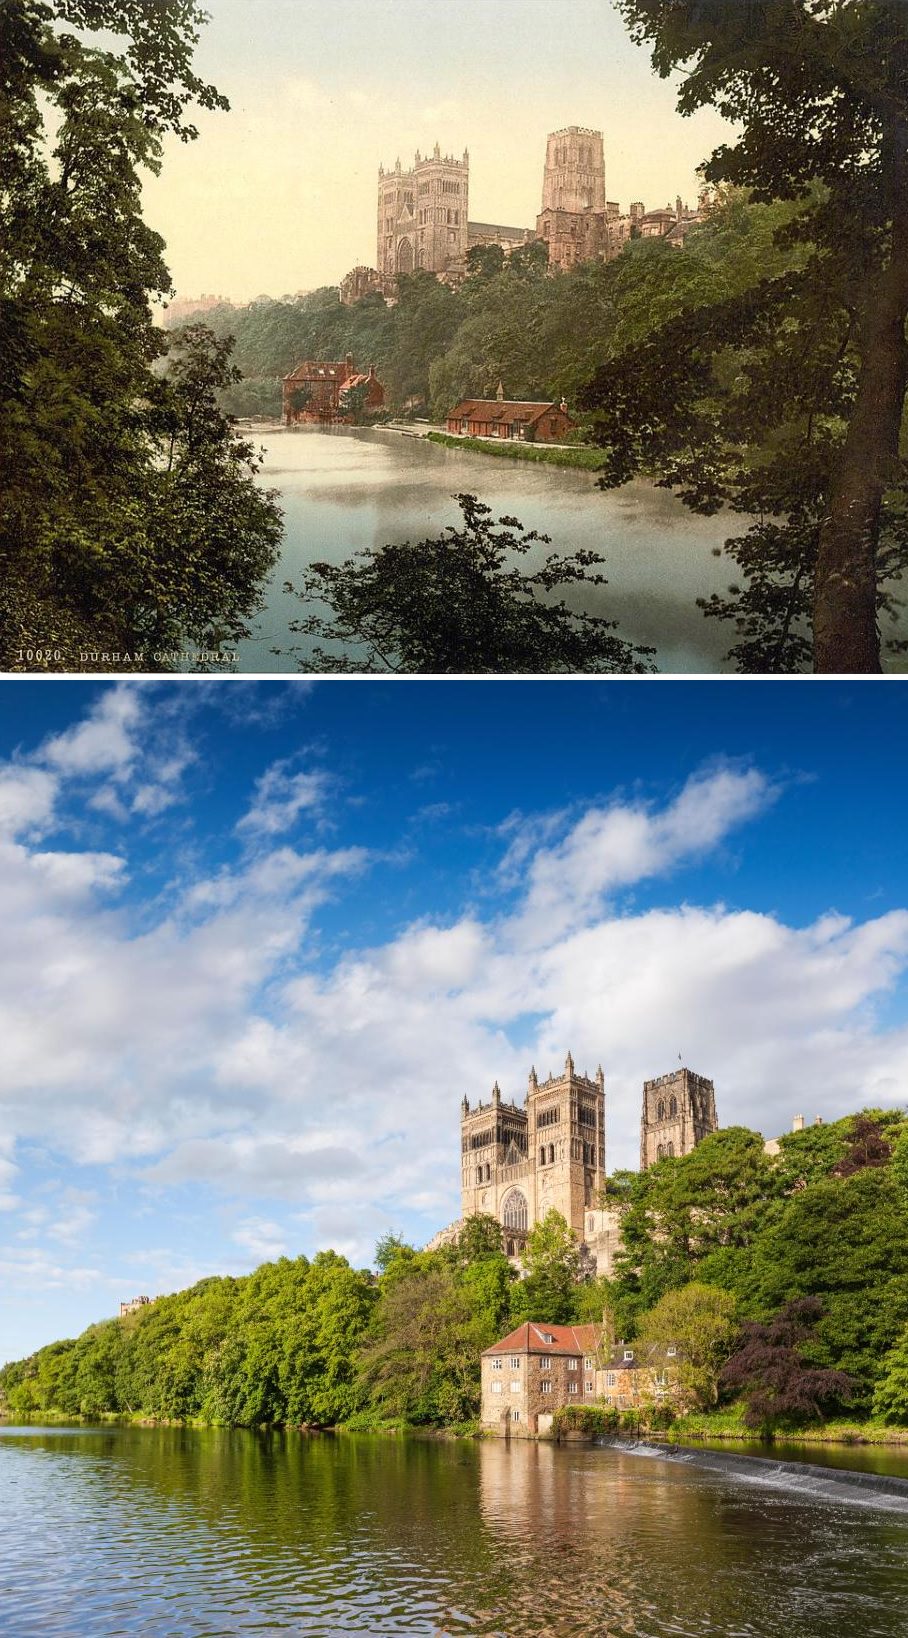 The ancient Durham Cathedral sits proudly overlooking the River Wear in the 1800s.